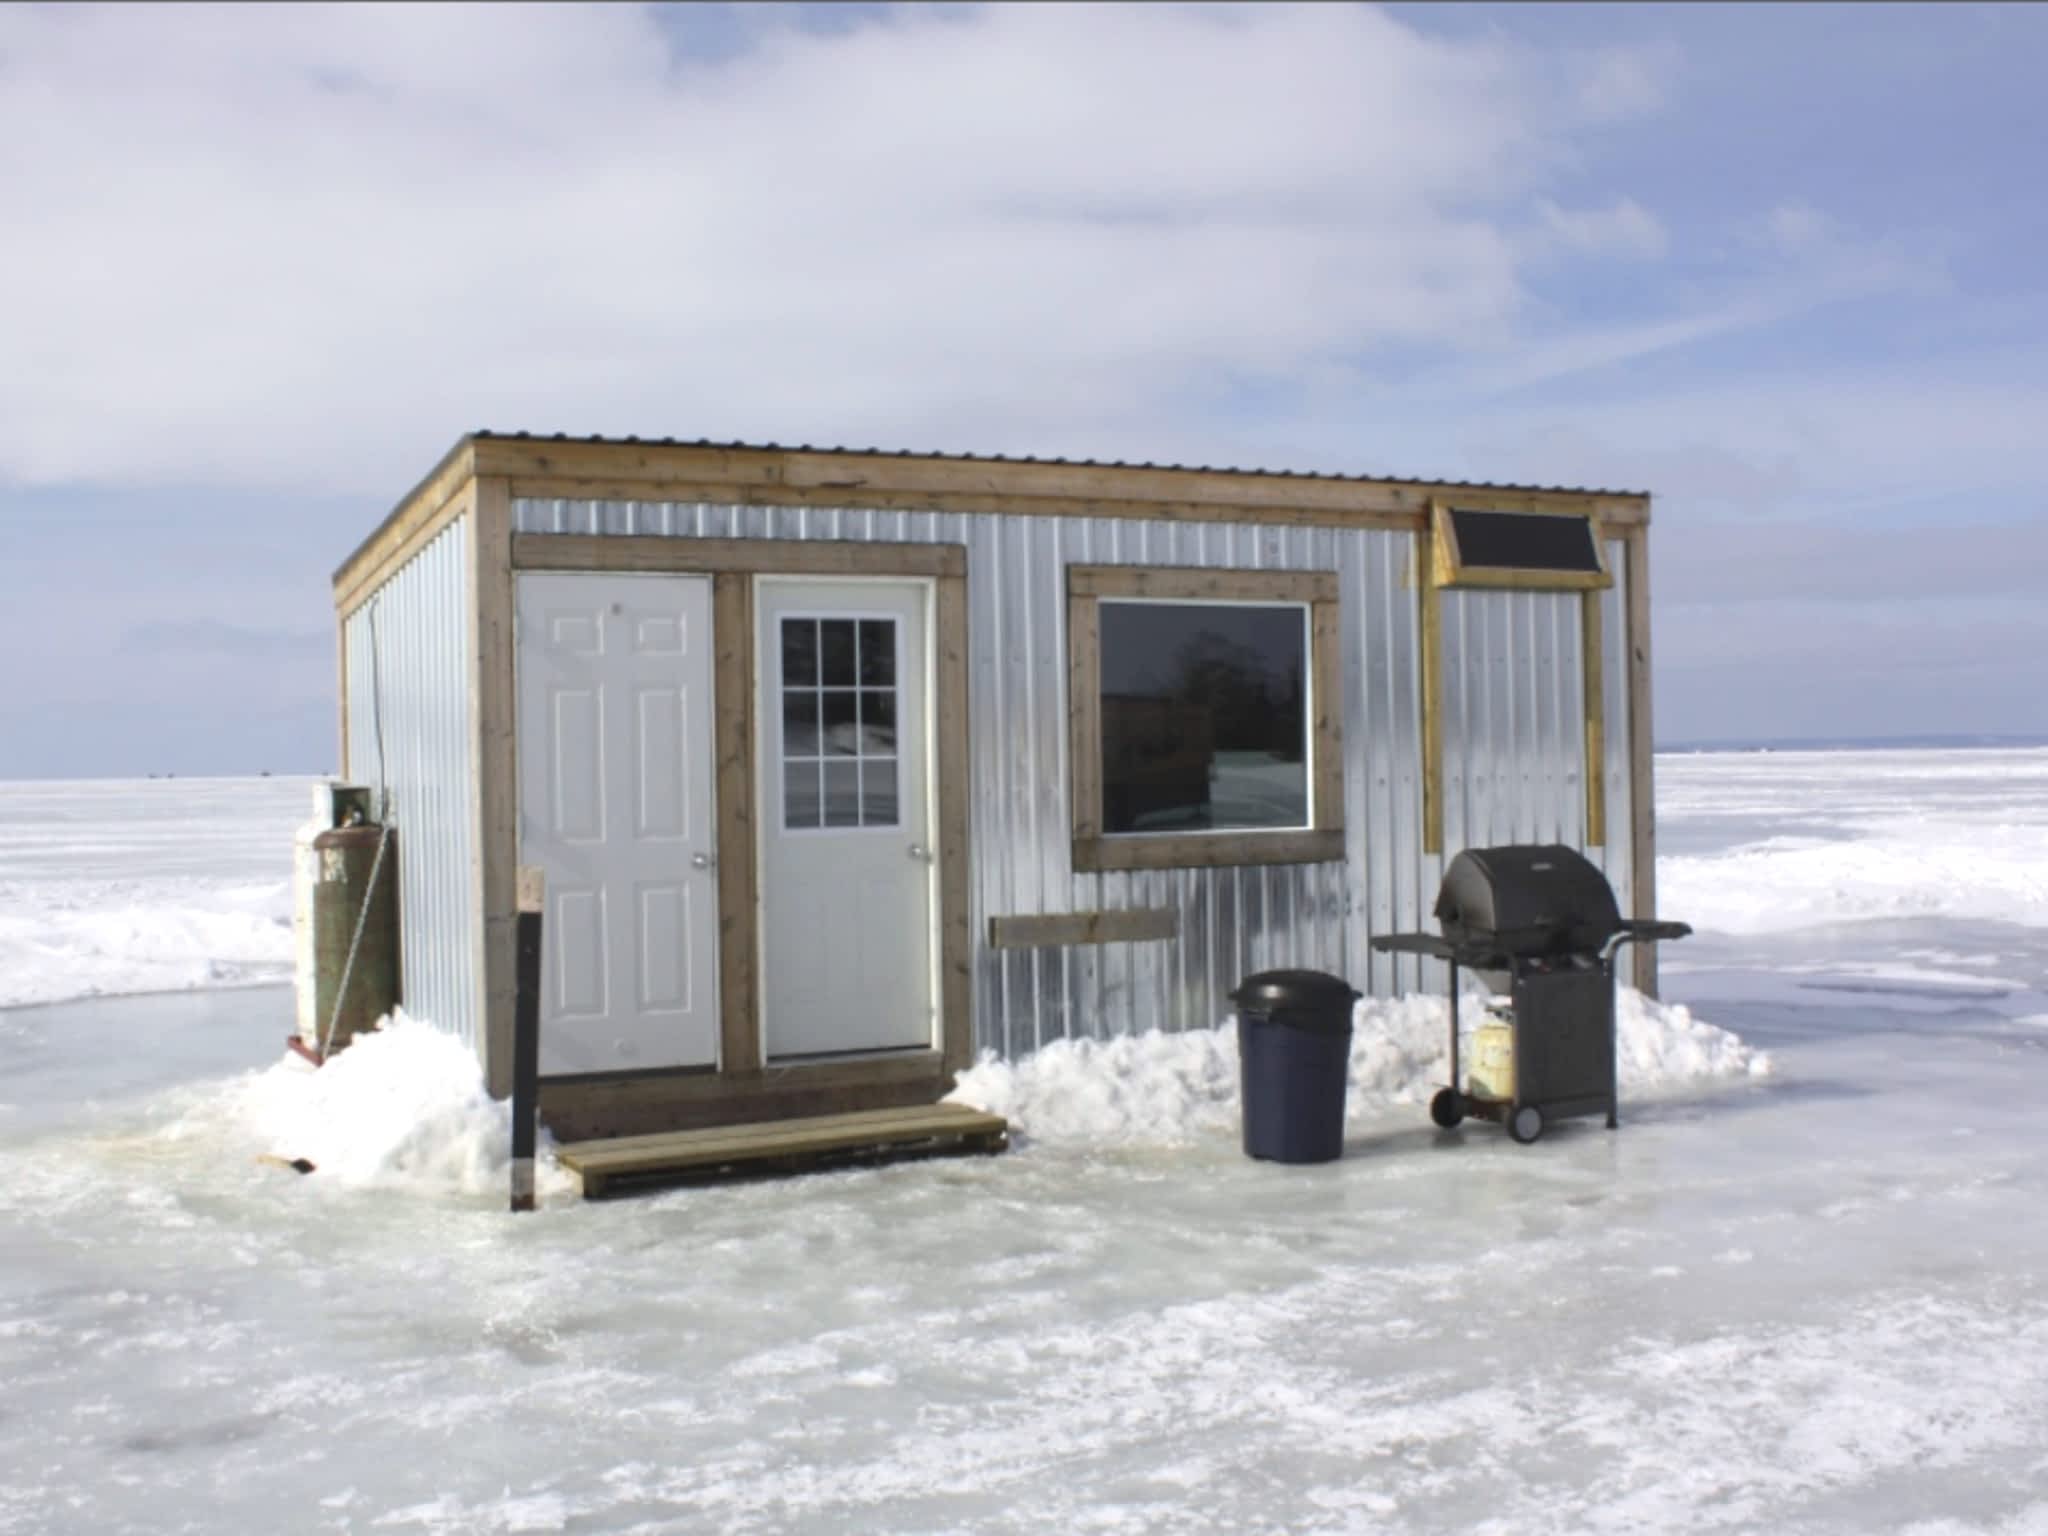 photo Chilly Willy's Ice Fishing Adventures